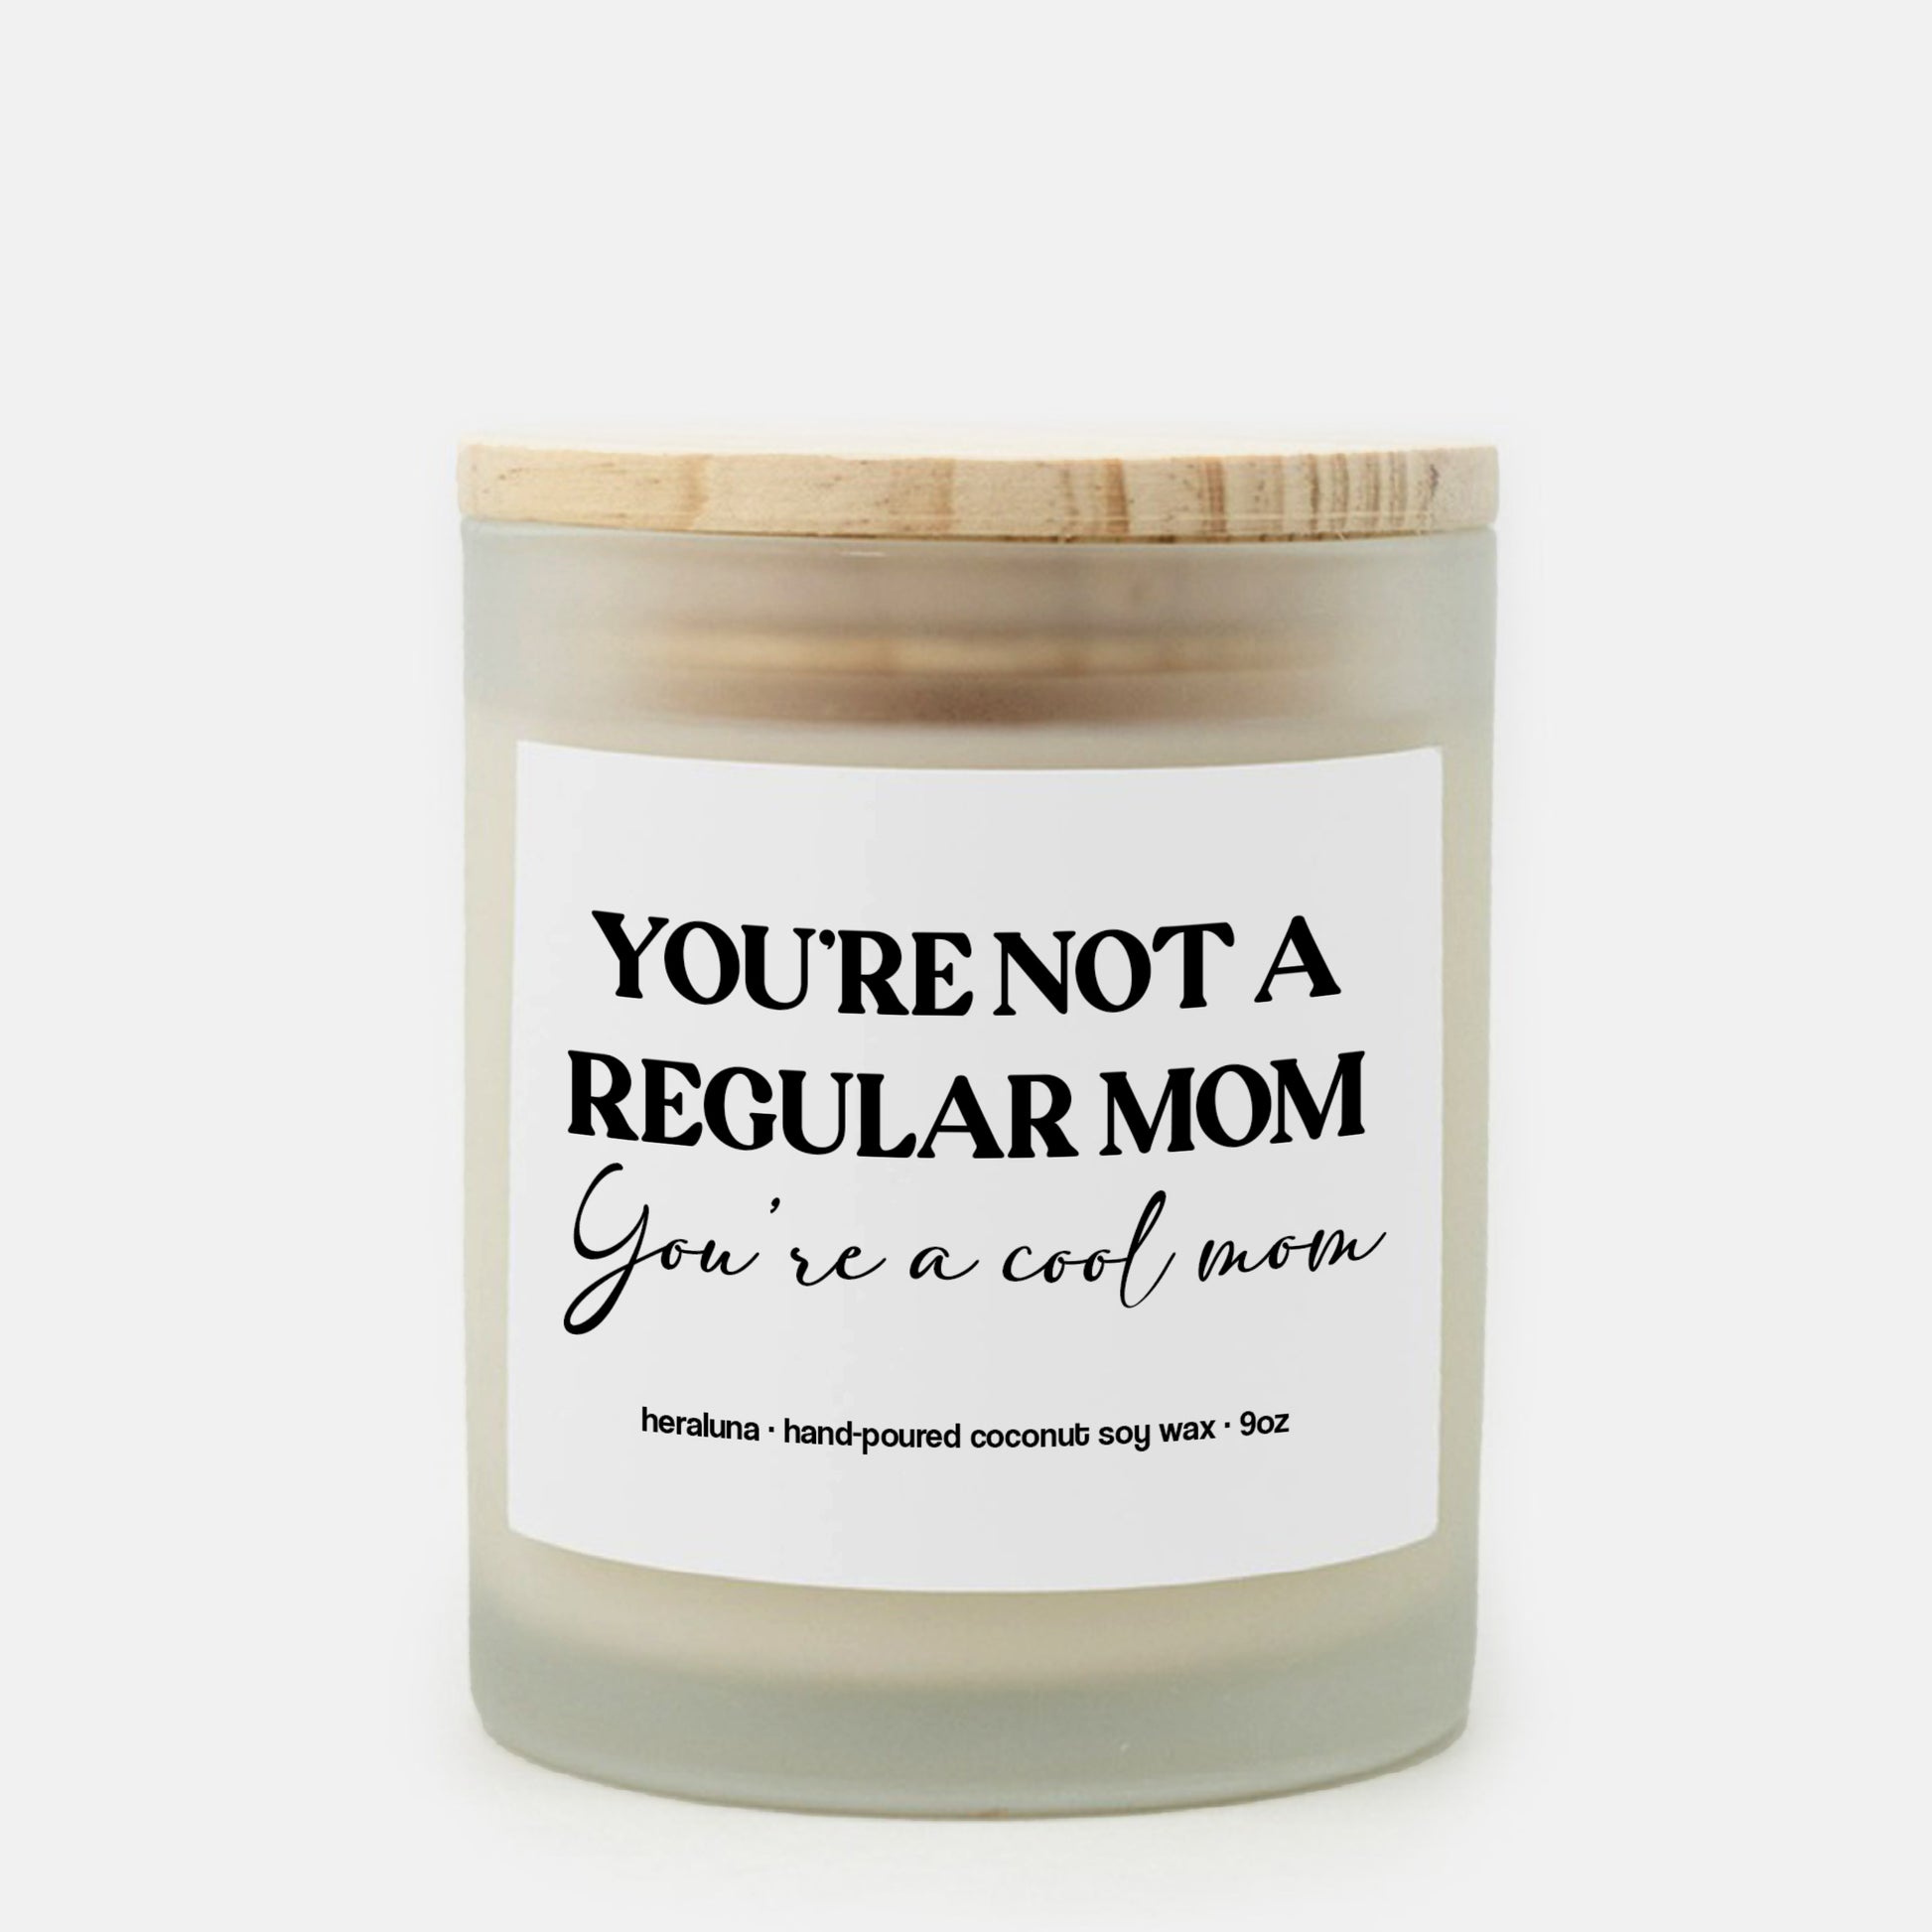 MOM Candle Gifts For Mom- Funny Birthday Gifts For Mom, Mothers Day Gift,  Lavender Scented Candle, 9 Oz Soy Wax